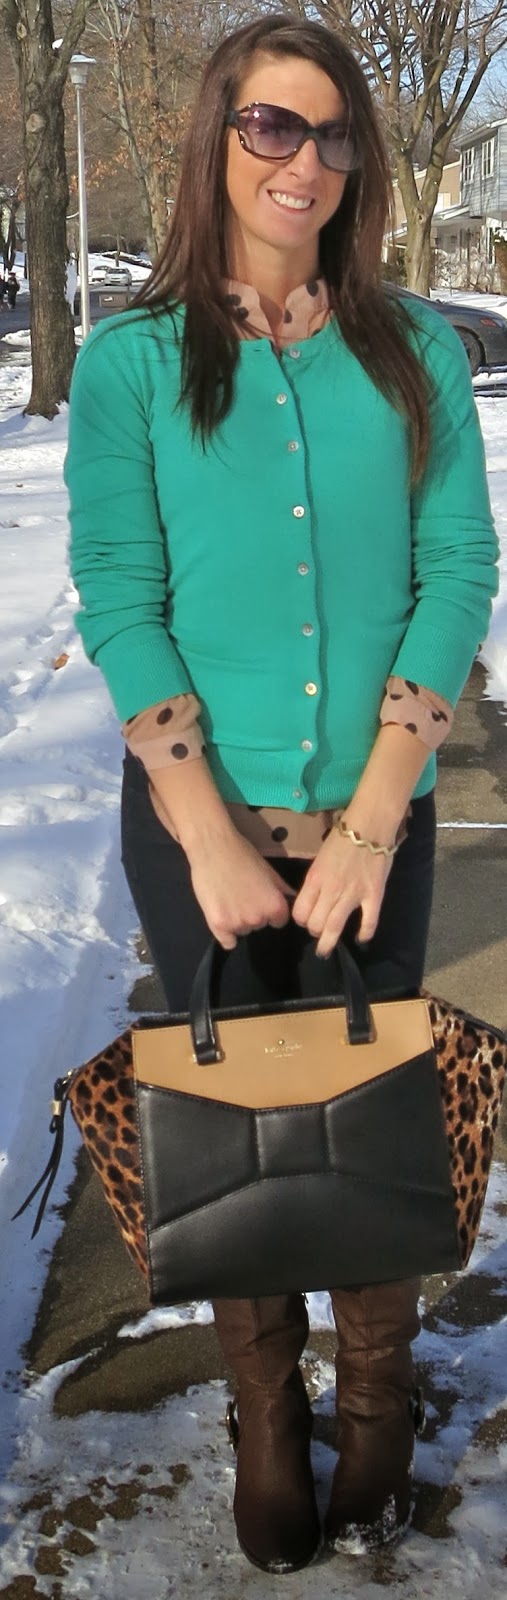 beau bag, brown black polka dots, Fashion, kate spade, leopard, mint, ootd, Outfit Ideas, outfit of the day, Outfits, sweater, what i wore, winter fashion, 